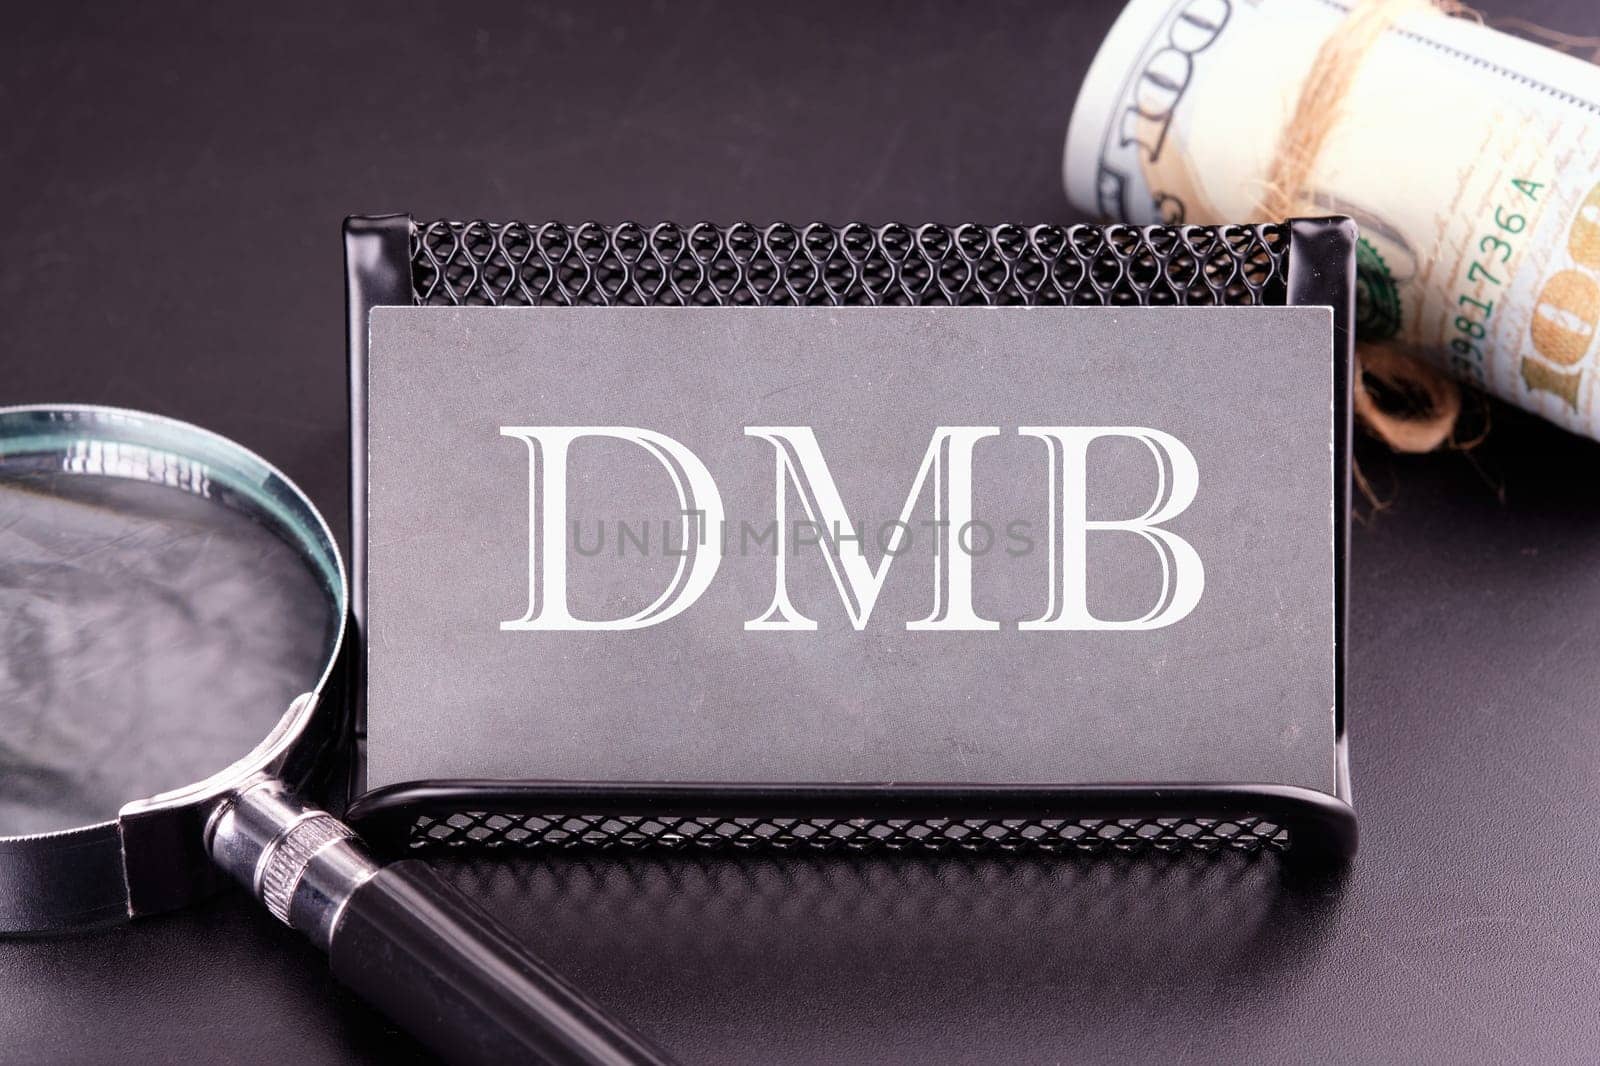 DMB text on the business card next to the money, a magnifying glass on a black background